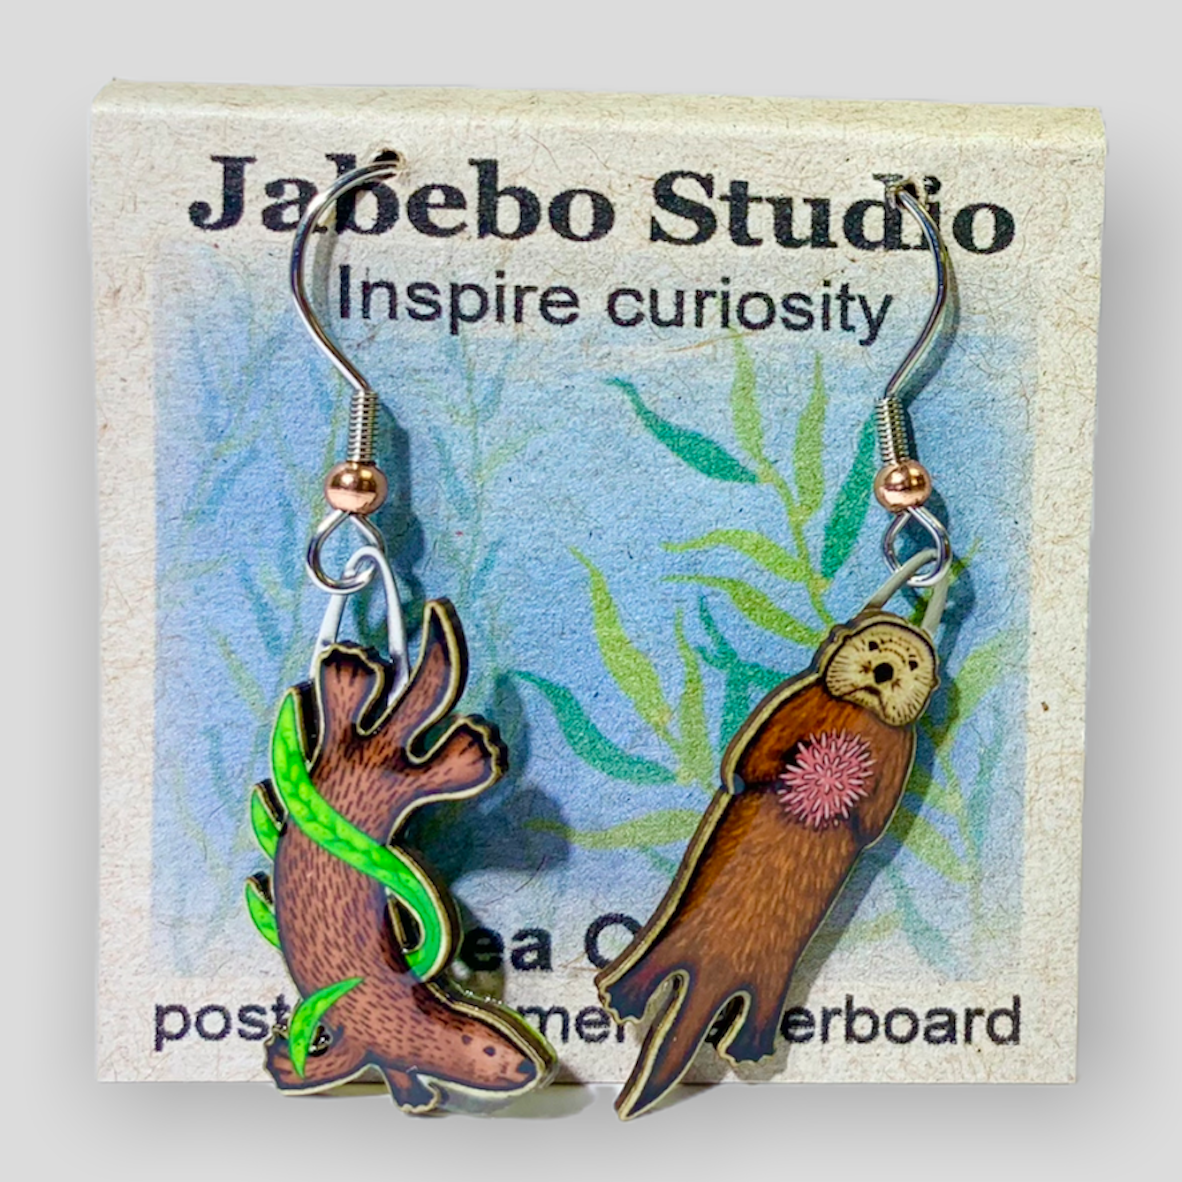 Picture shown is of 1 inch tall pair of earrings of the marine animal the Sea Otter.